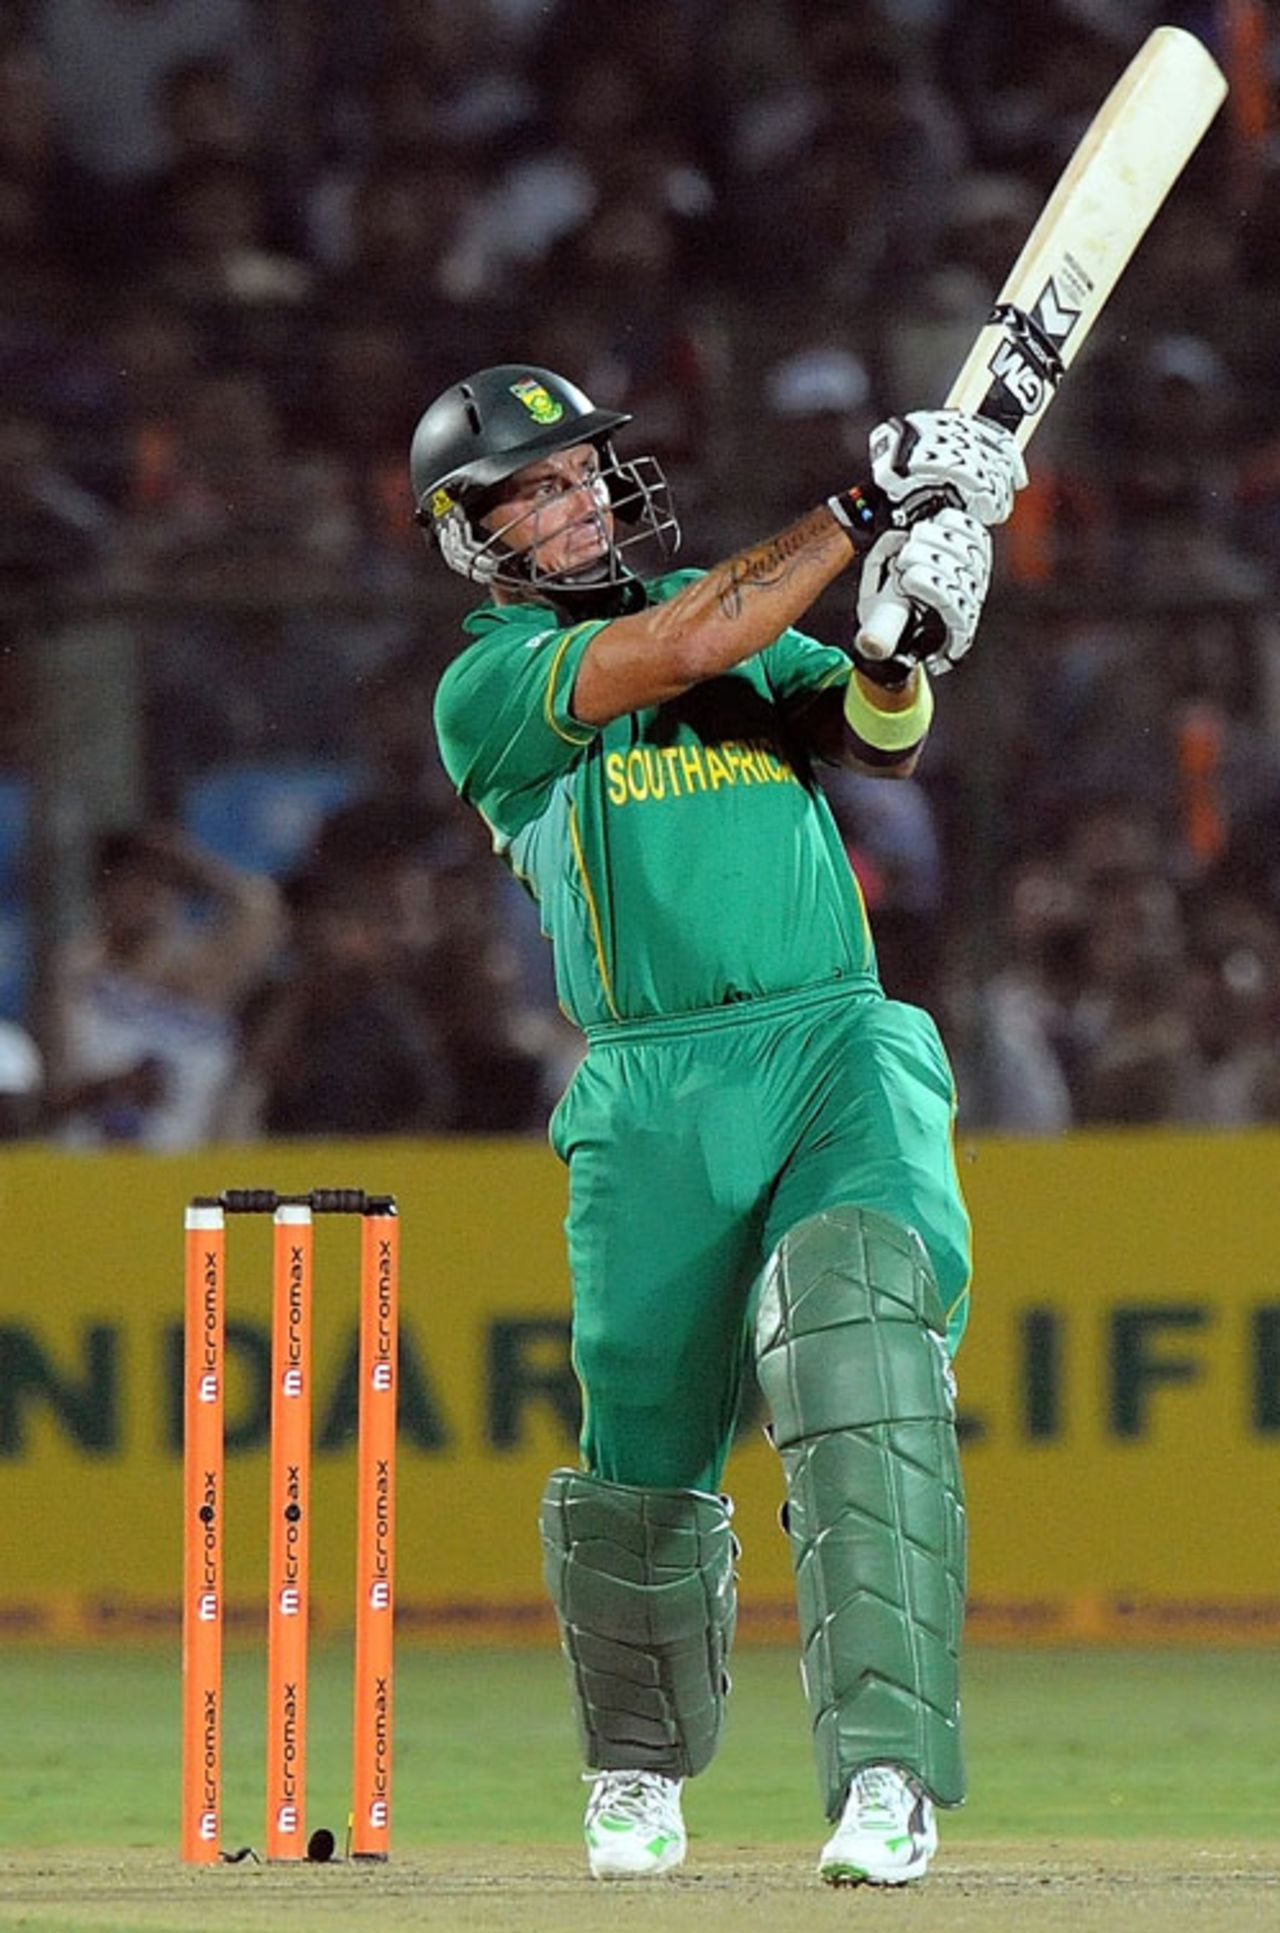 Herschelle Gibbs swings a six over midwicket, India v South Africa, 1st ODI, Jaipur, February 21, 2010